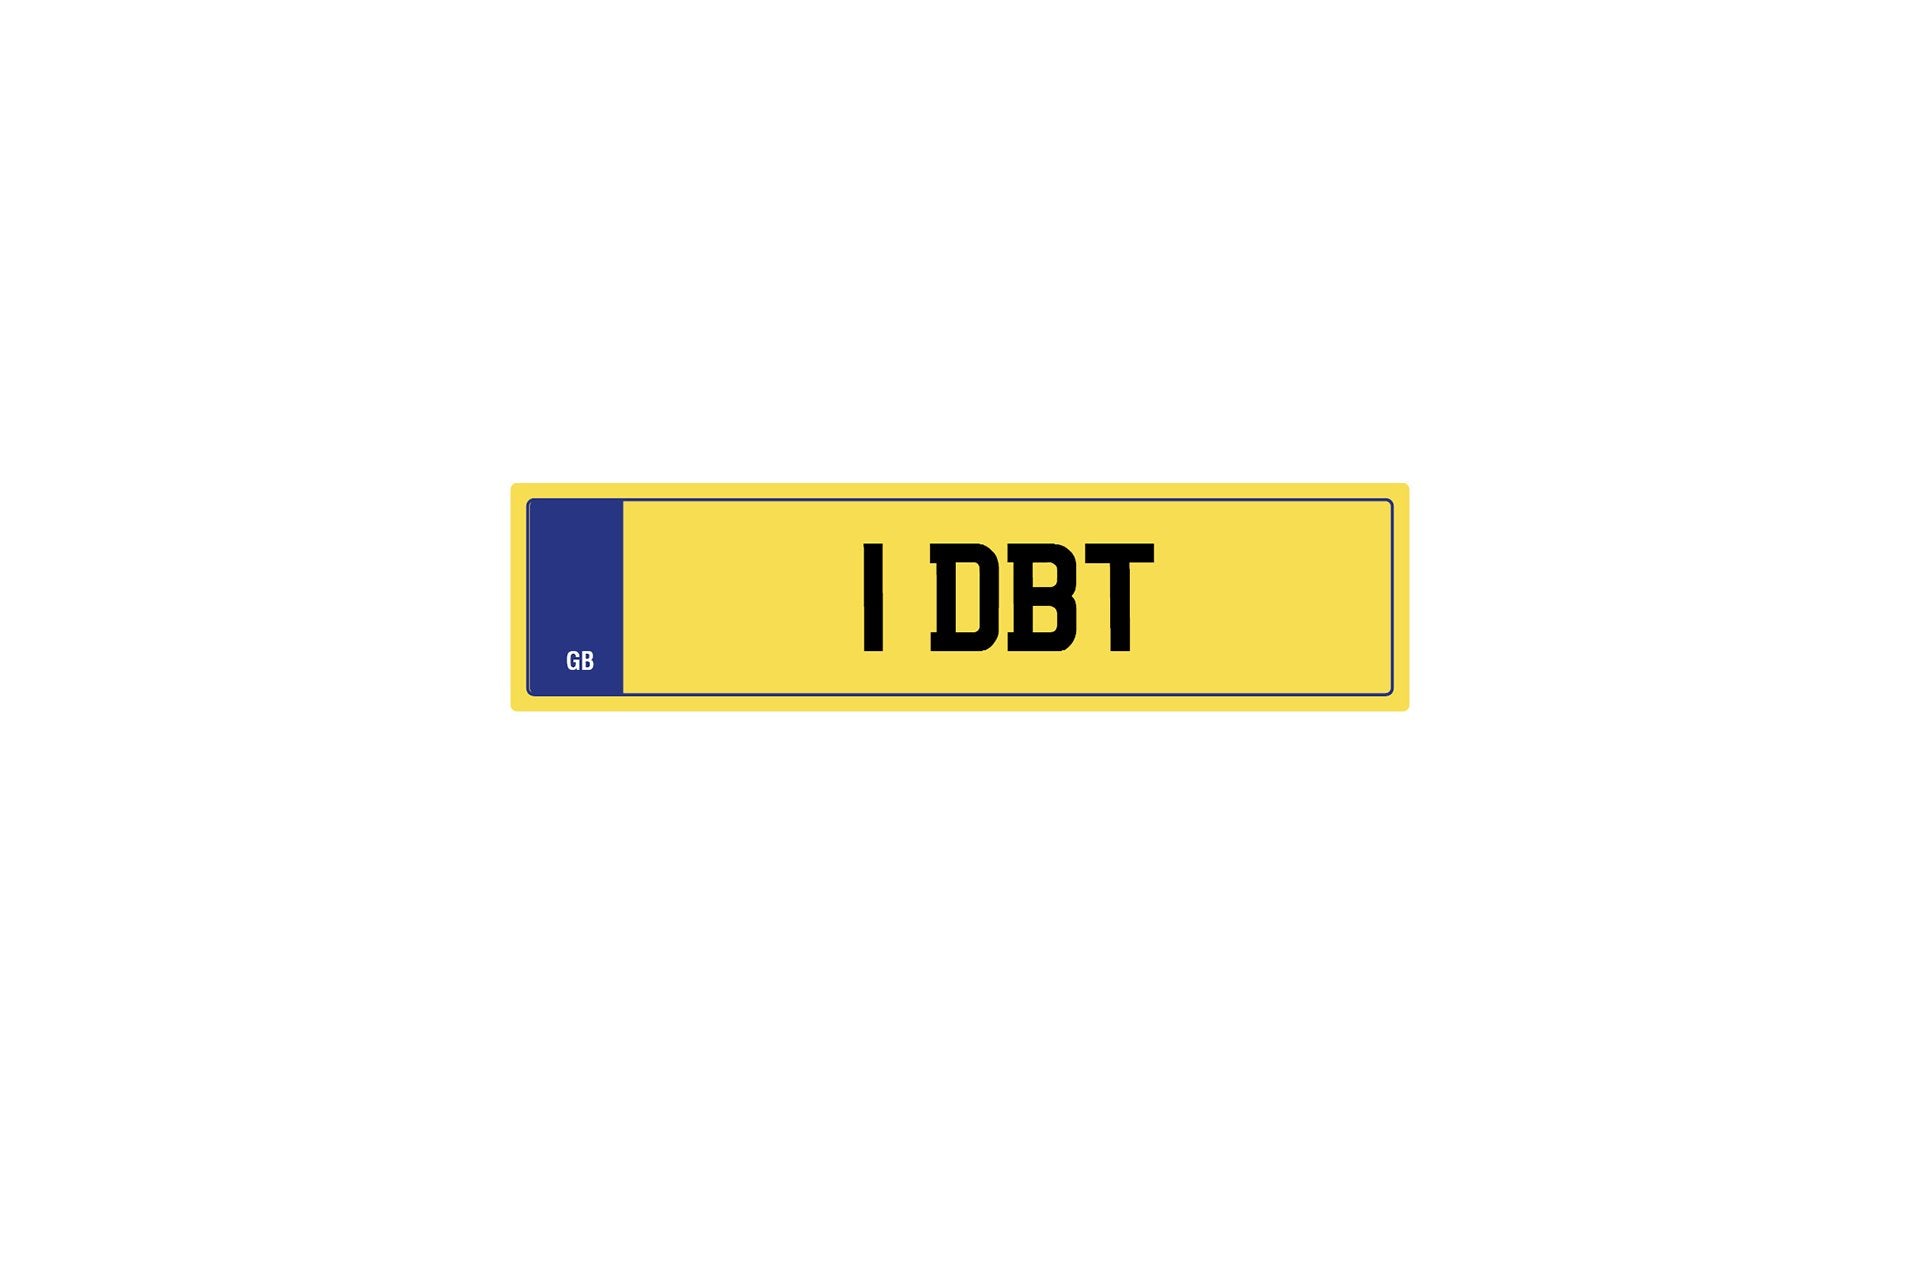 Private Plate 1 Dbt by Kahn - Image 263